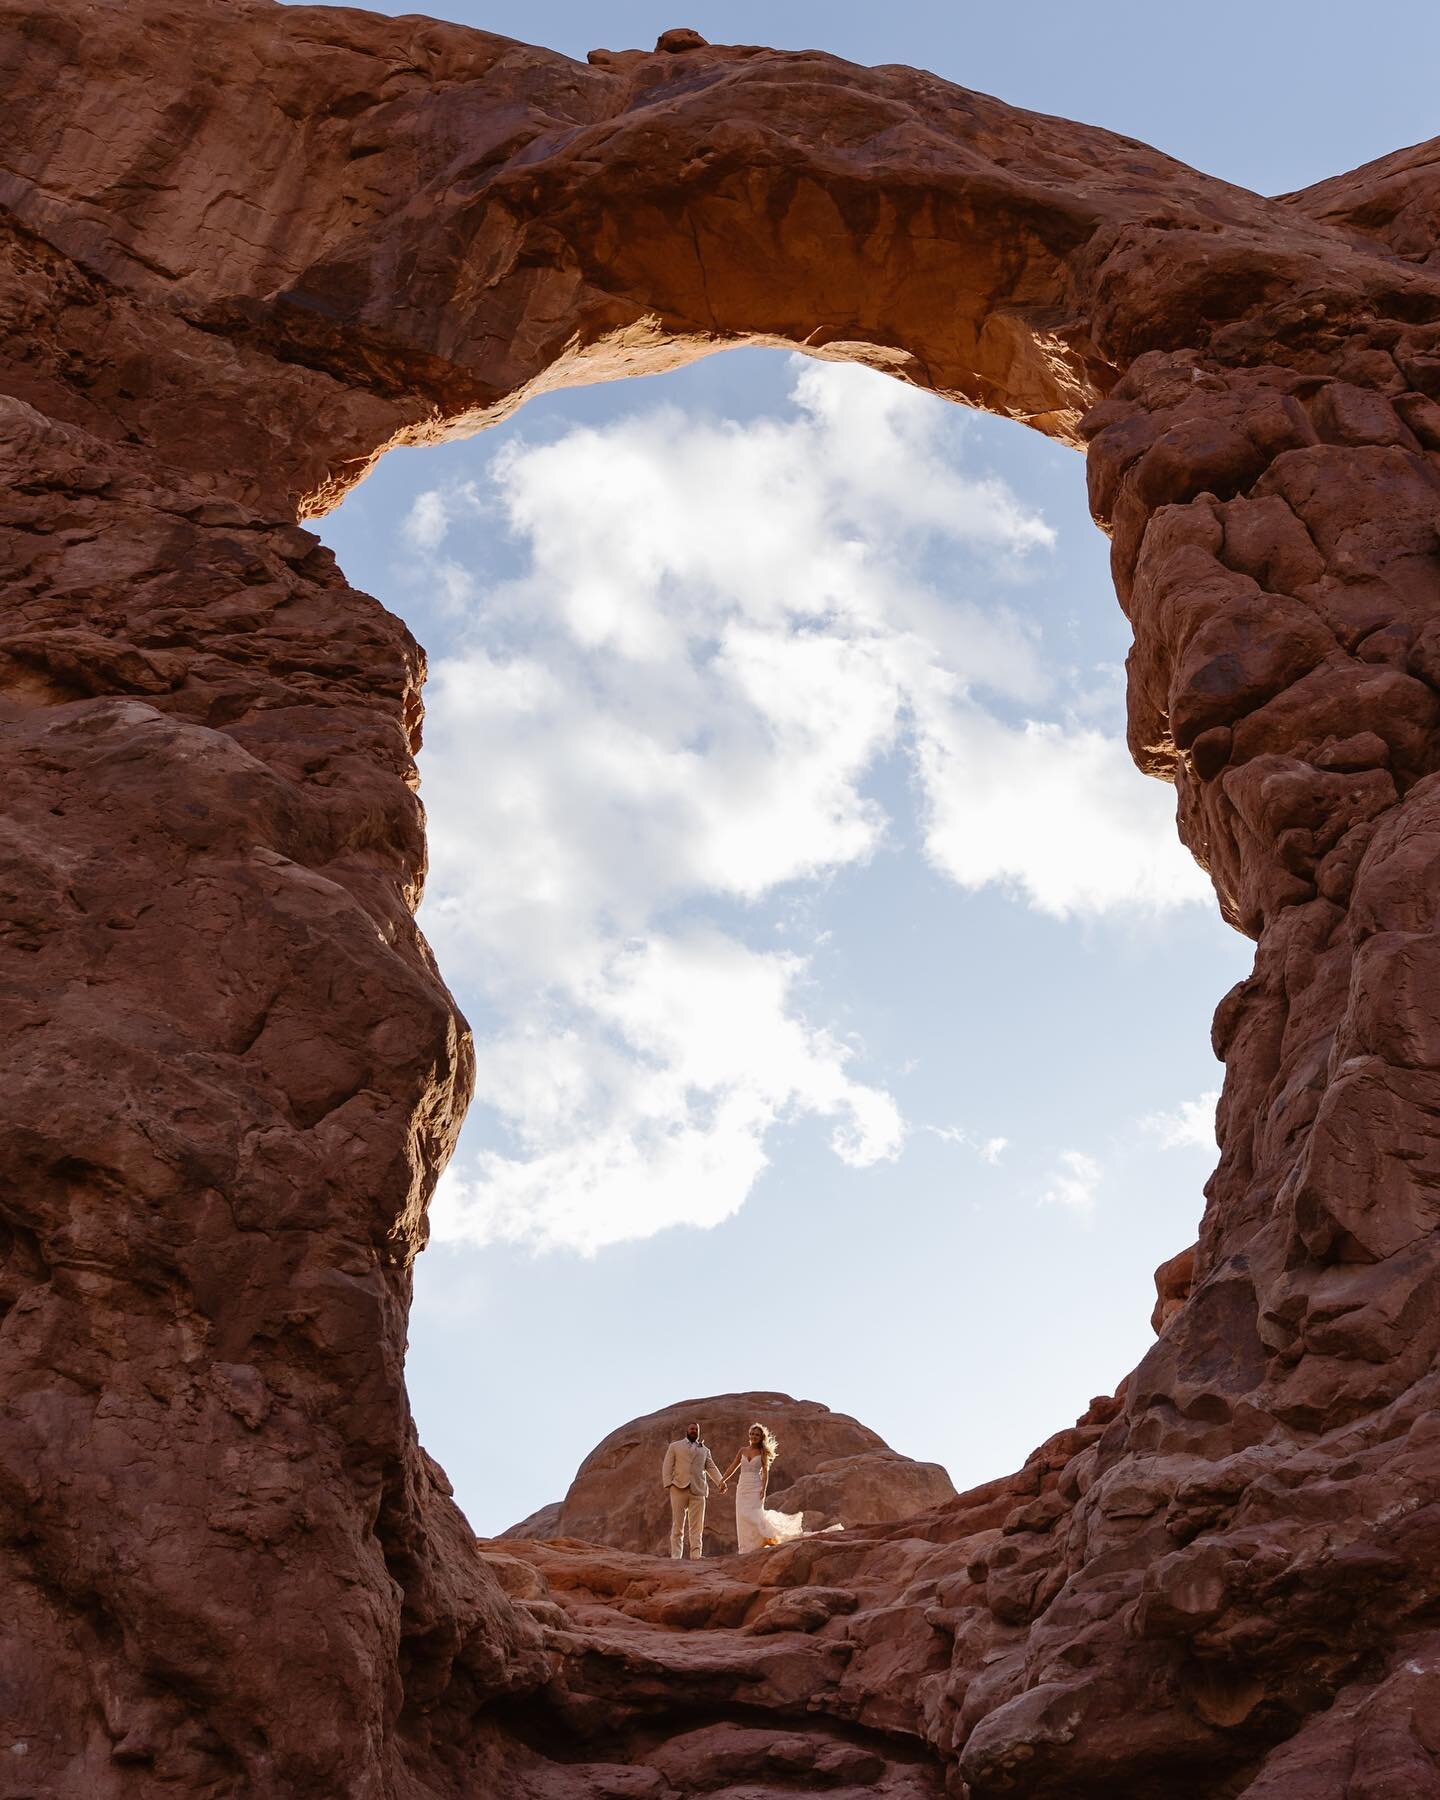 Witnessing these massive Arches in person is pretty mind boggling! They&rsquo;re SO massive! While I don&rsquo;t suggest having Arches National Park as you main ceremony location (too many restrictions &amp; crowded), it&rsquo;s a great option for ad